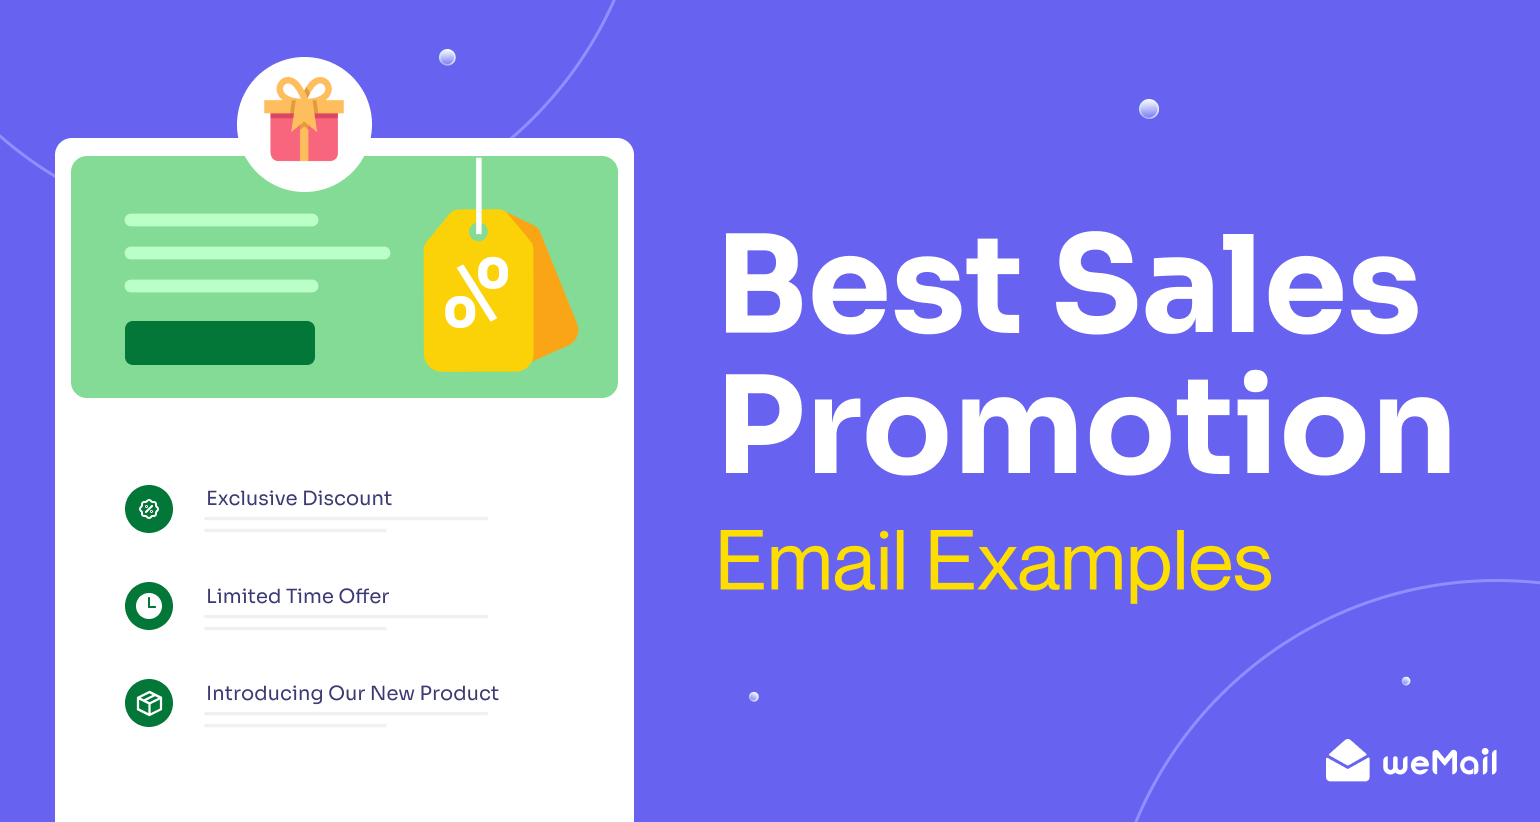 Best Sales Promotion Email Examples